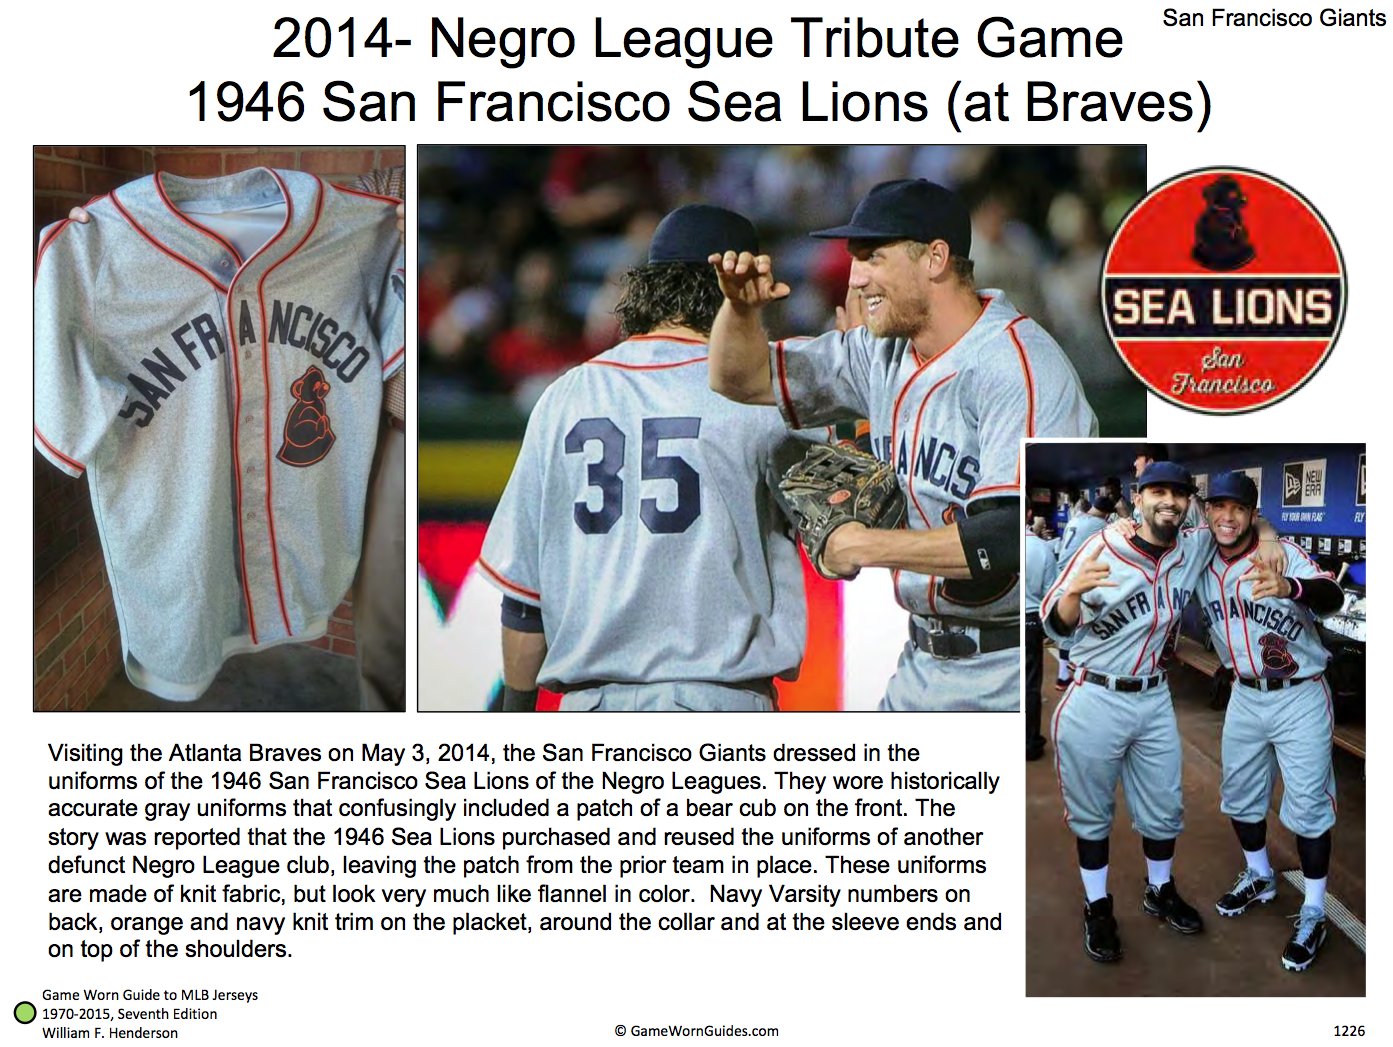 Red Sox, Mariners Honor Negro Leagues With Throwback Uniforms